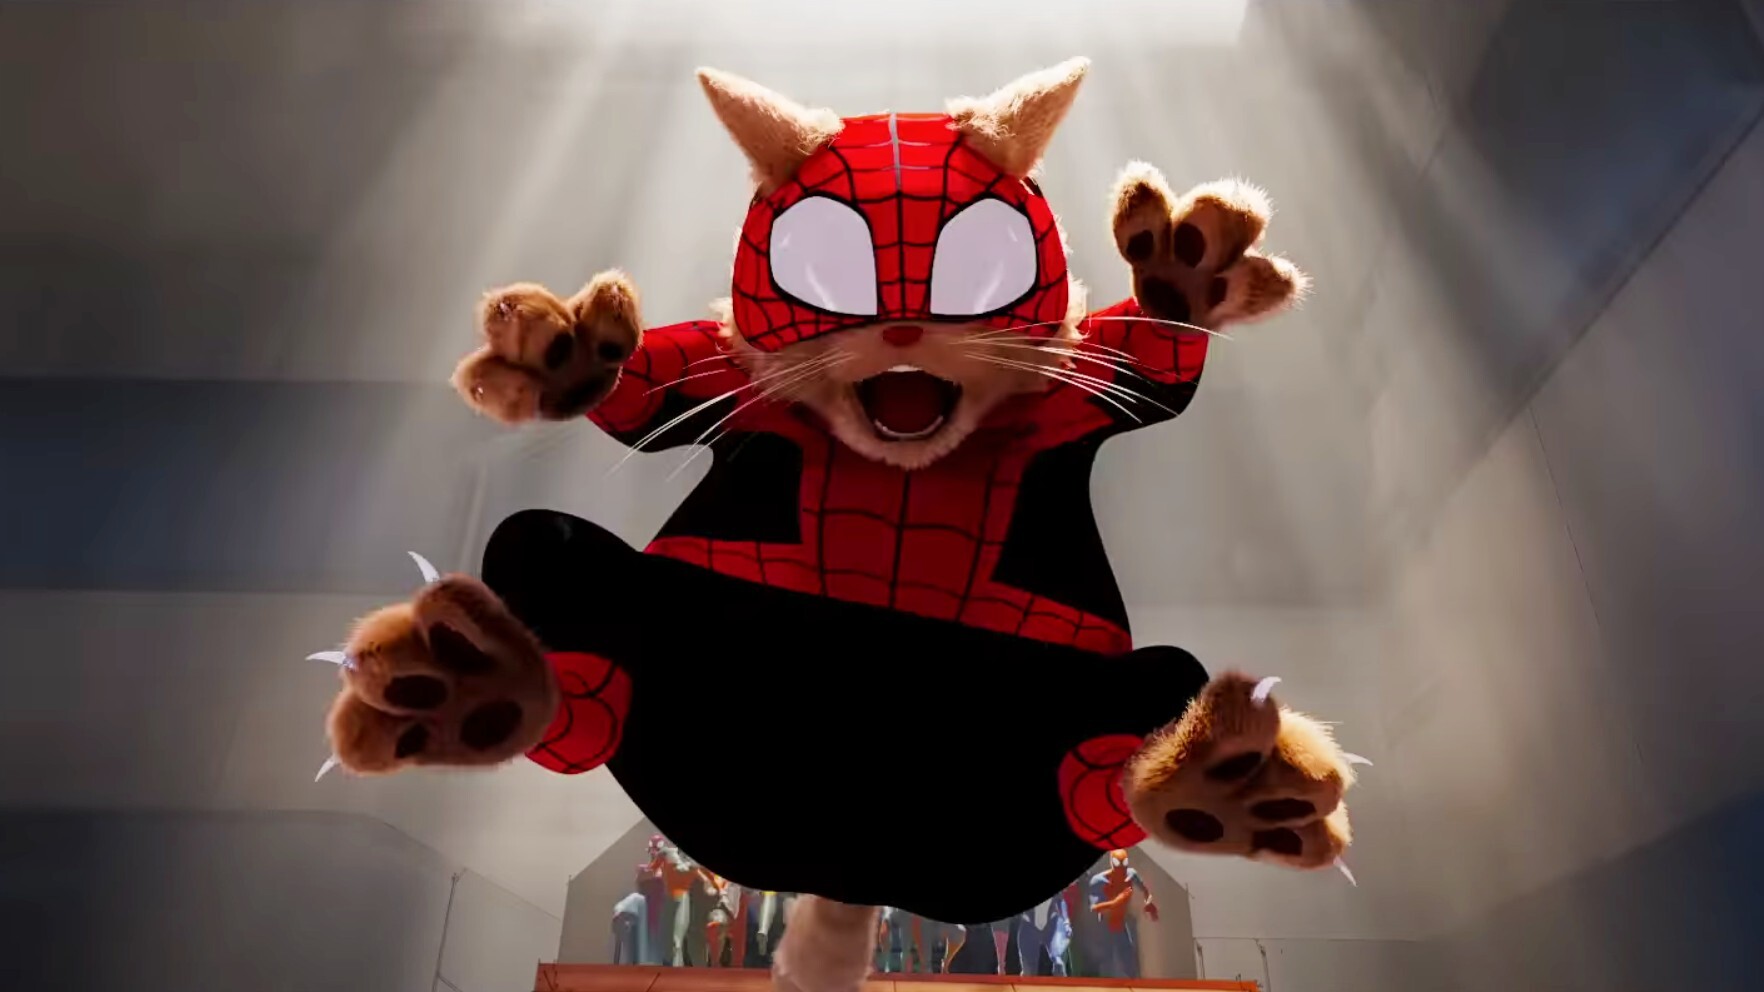 New Across The Spider-Verse Trailer Reveals The Spider-Cat - GameSpot